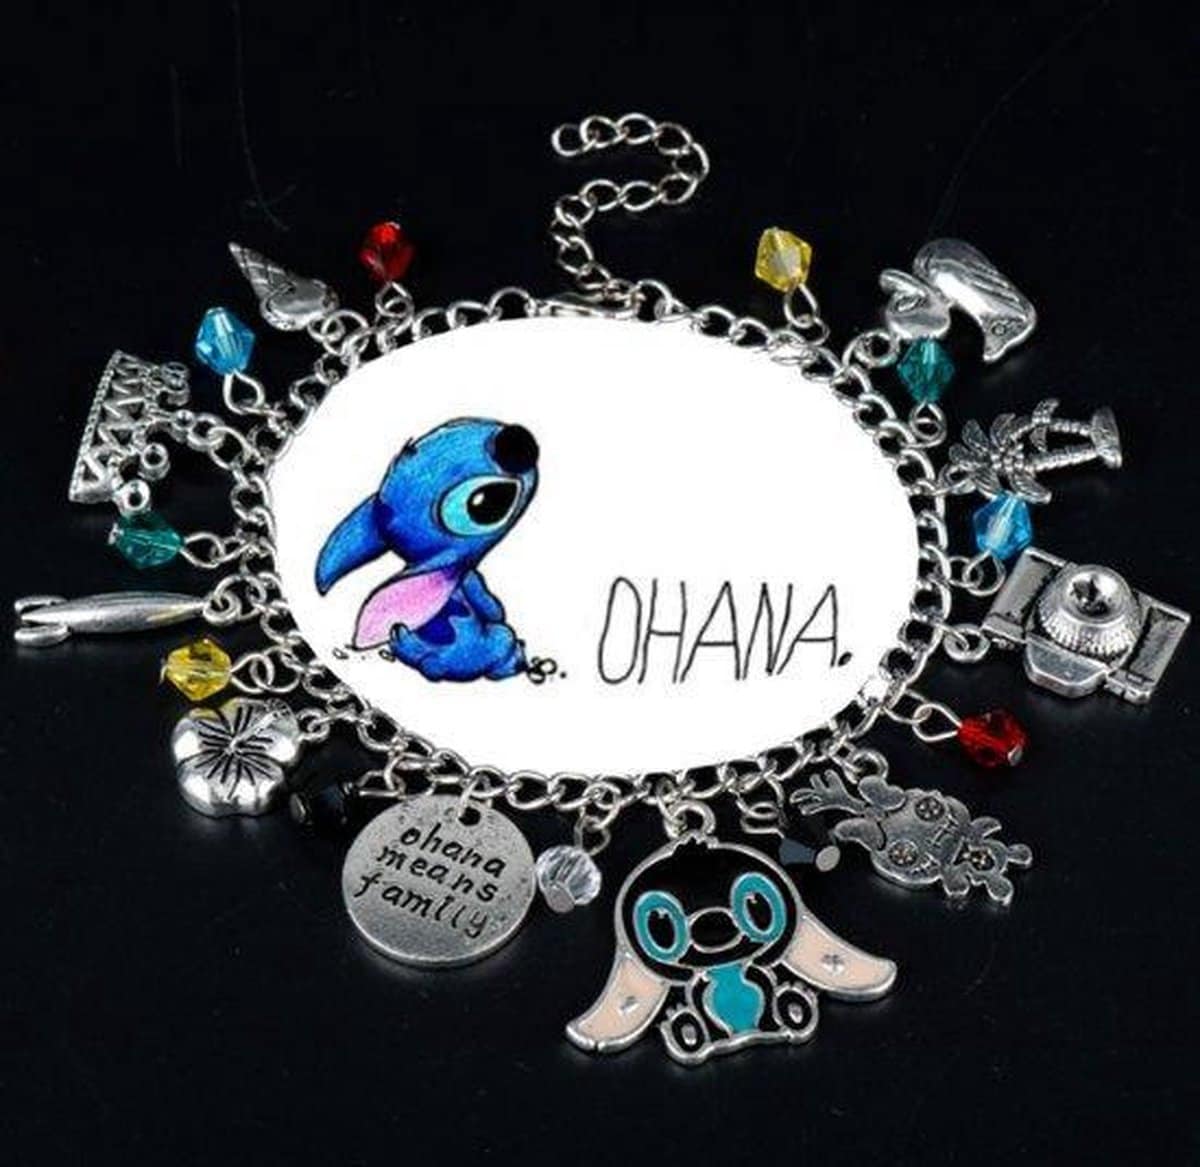 Wall Stitch Decal Lilo and Stitch Quote Ohana Means Family Nobody